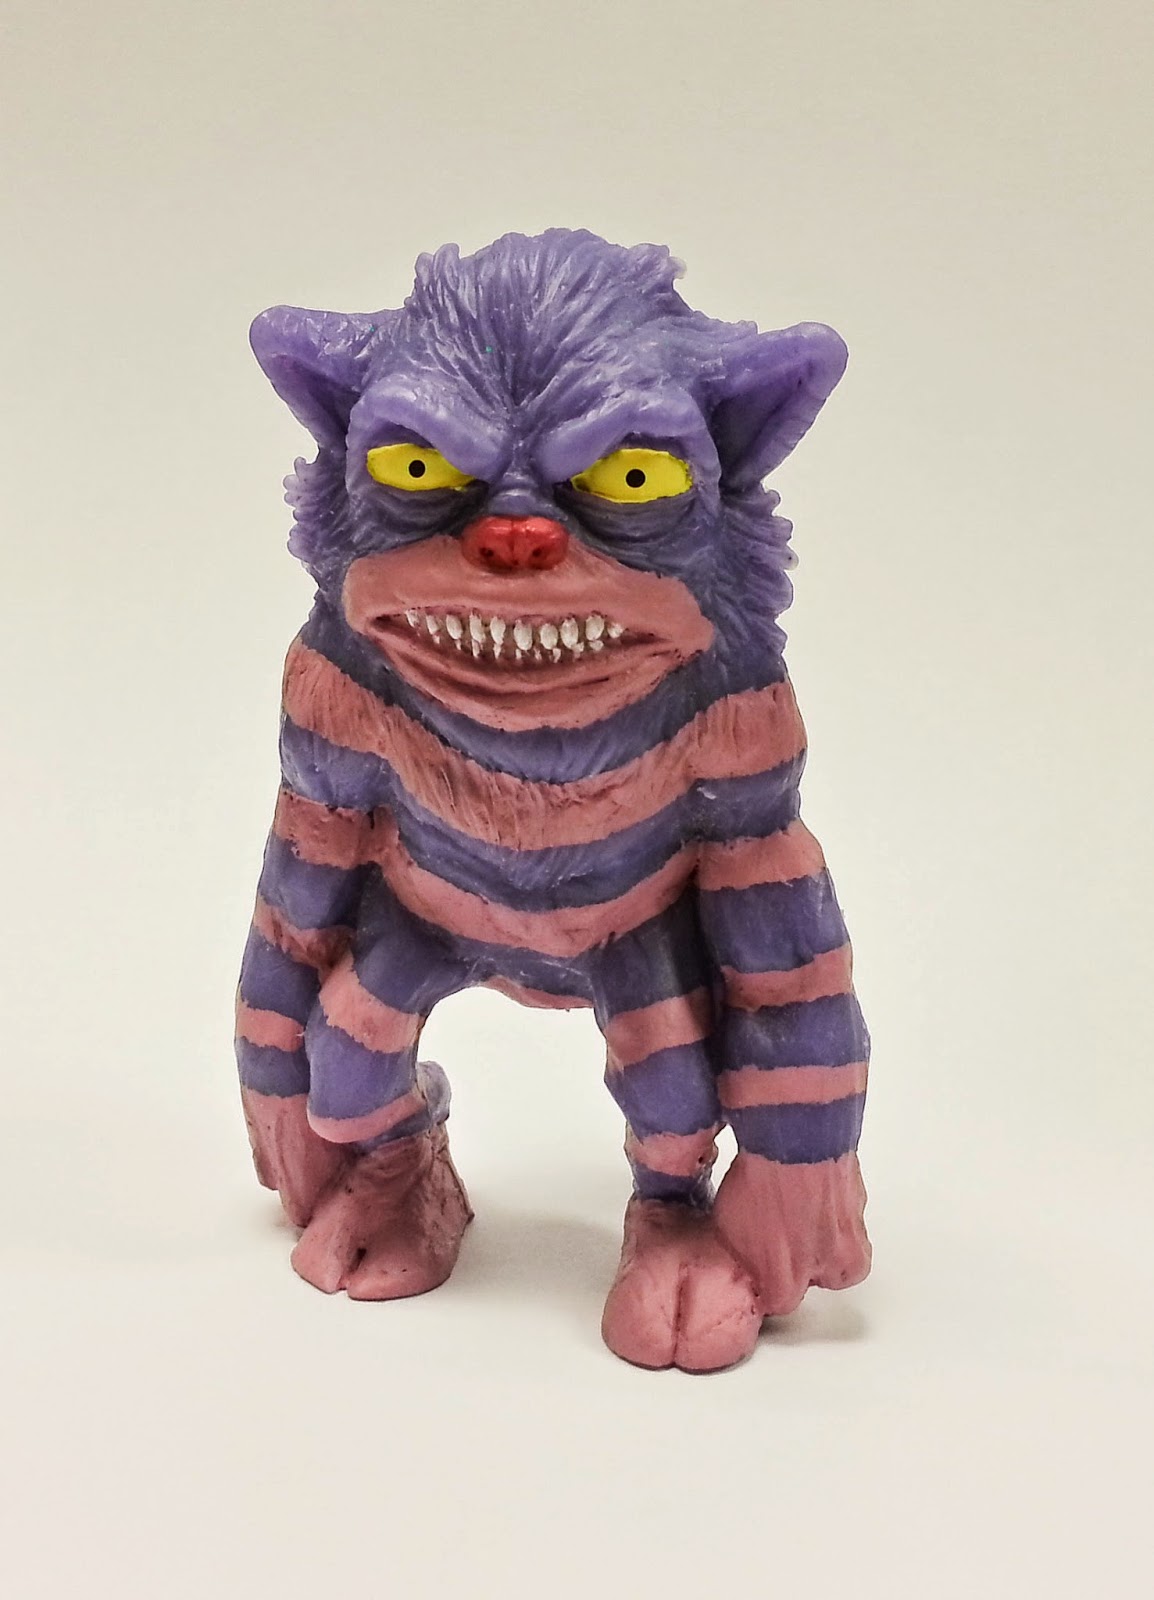 “Cheshire Cat” Ghoulie Resin Figure by Motorbot
